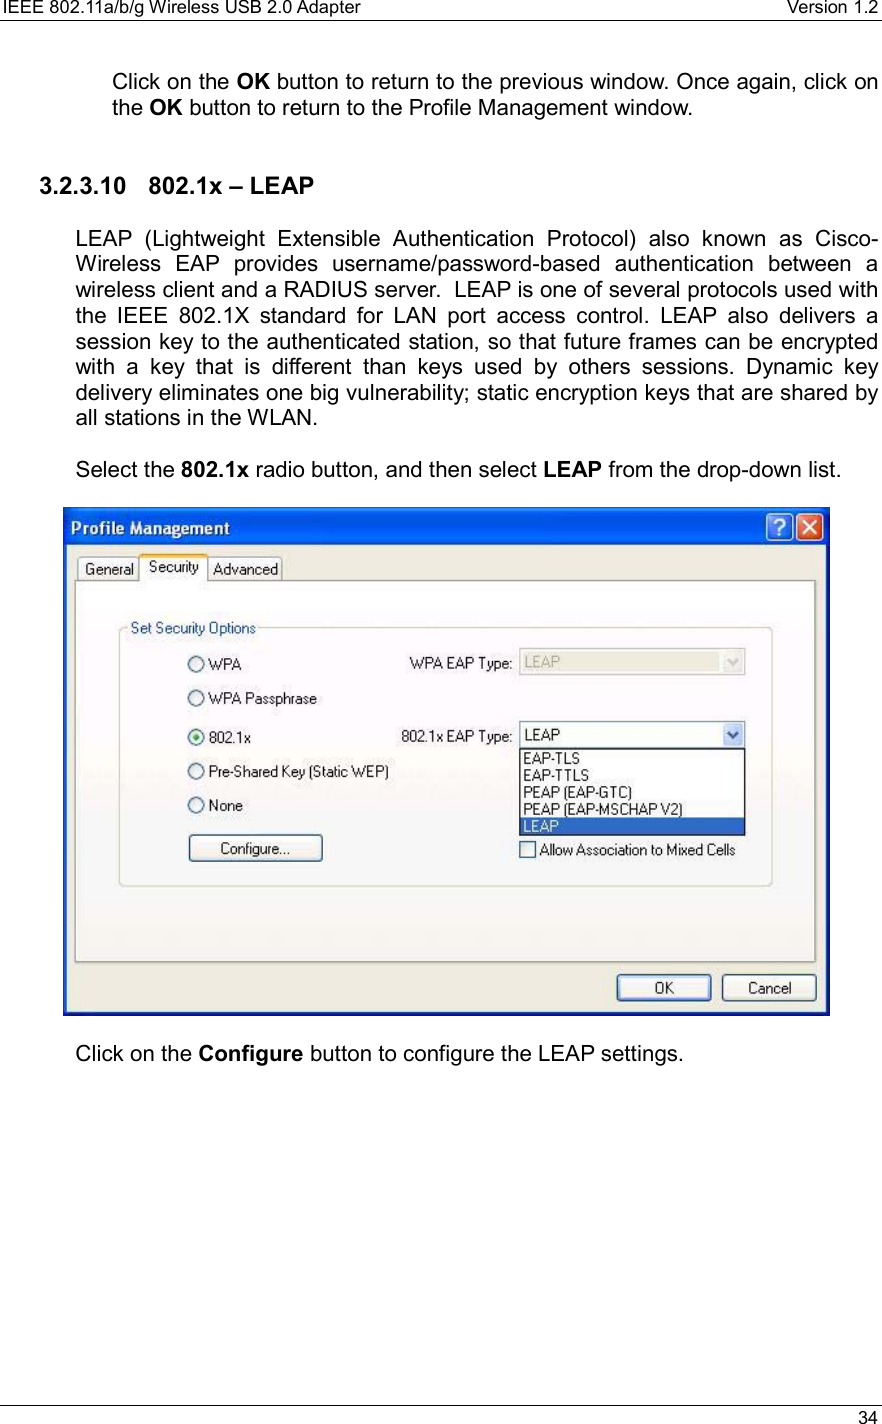 IEEE 802.11a/b/g Wireless USB 2.0 Adapter    Version 1.2   34  Click on the OK button to return to the previous window. Once again, click on the OK button to return to the Profile Management window.     3.2.3.10  802.1x – LEAP  LEAP (Lightweight Extensible Authentication Protocol) also known as Cisco-Wireless EAP provides username/password-based authentication between a wireless client and a RADIUS server.  LEAP is one of several protocols used with the IEEE 802.1X standard for LAN port access control. LEAP also delivers a session key to the authenticated station, so that future frames can be encrypted with a key that is different than keys used by others sessions. Dynamic key delivery eliminates one big vulnerability; static encryption keys that are shared by all stations in the WLAN.  Select the 802.1x radio button, and then select LEAP from the drop-down list.     Click on the Configure button to configure the LEAP settings.  